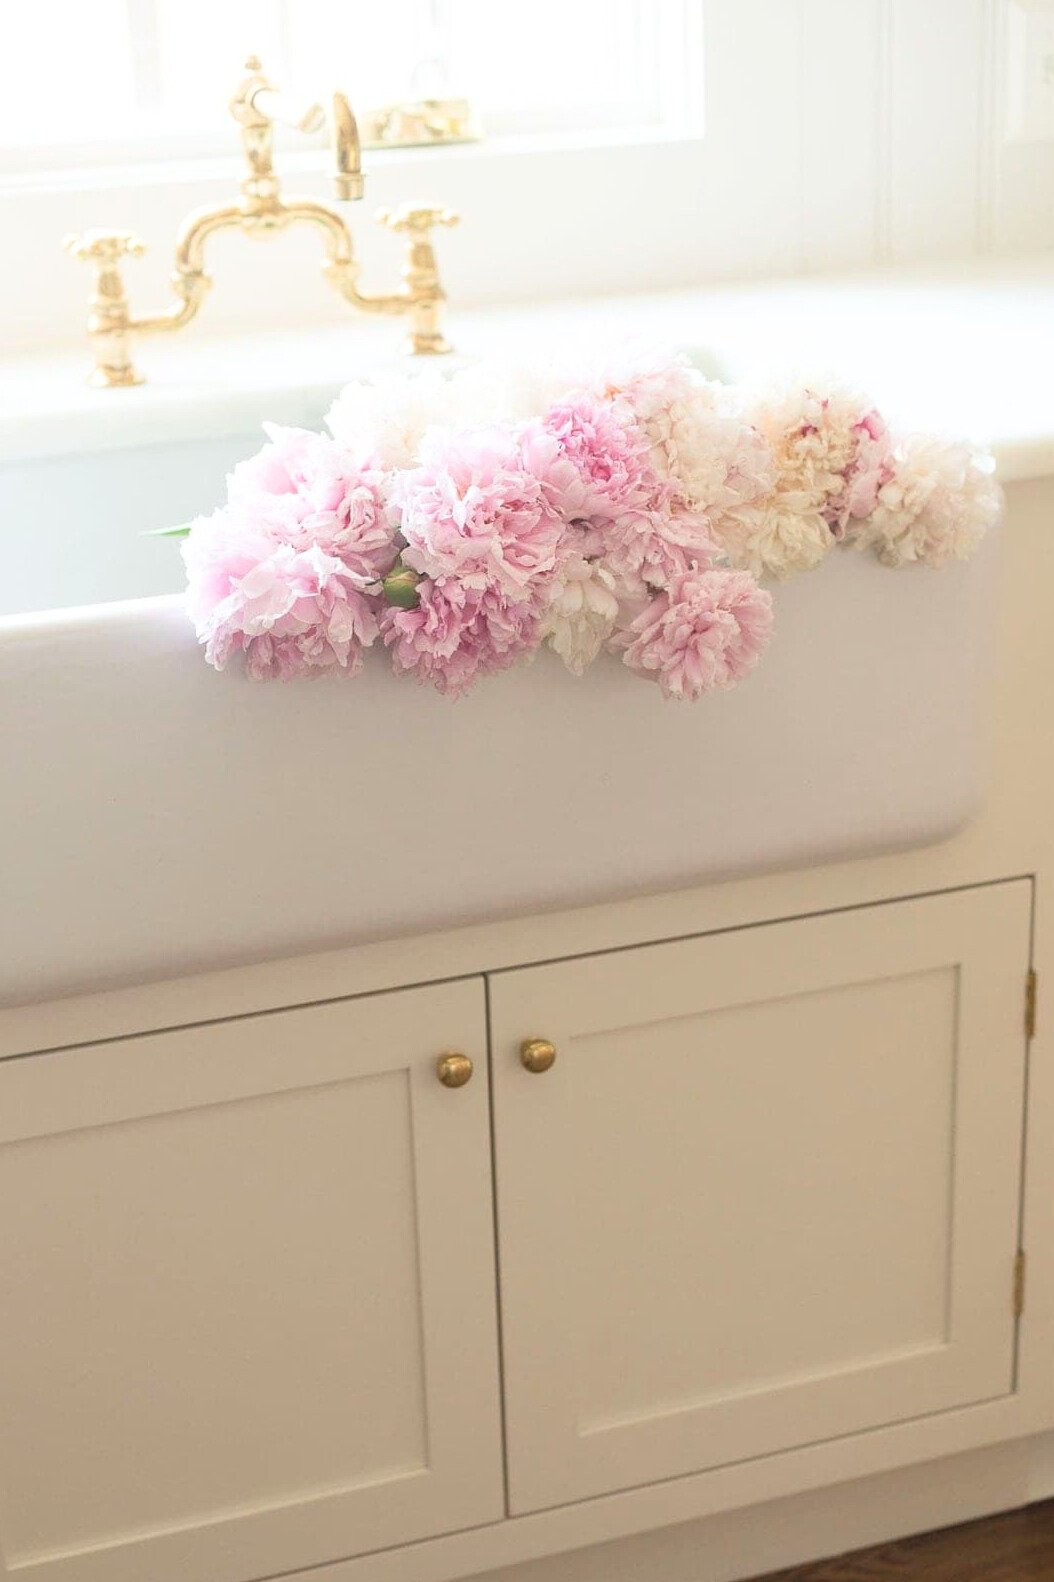 A white kitchen sink with pink peony flowers in it.